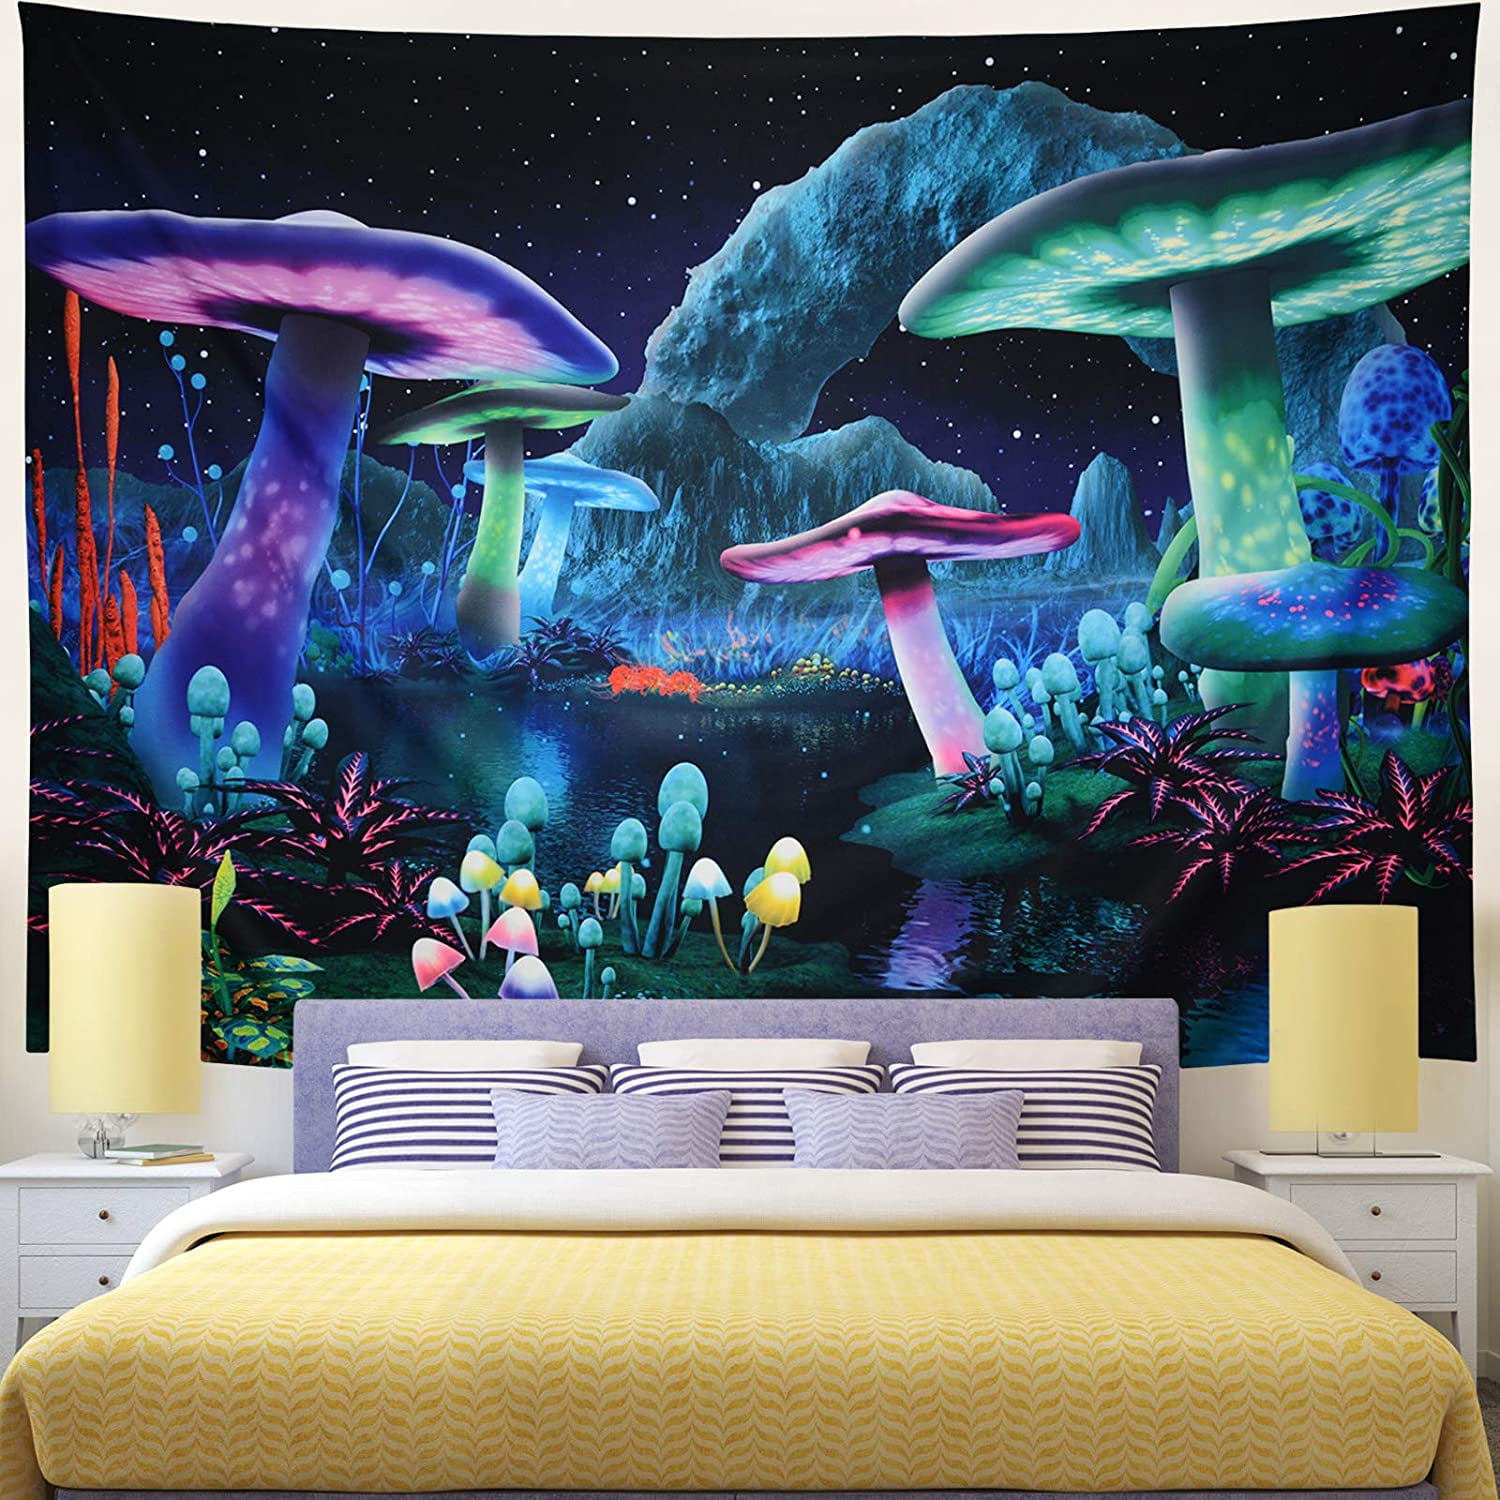 Deep Psychedlic Starry Sky Tapestry Wall Hanging Tapestry Living Room Home Decor 